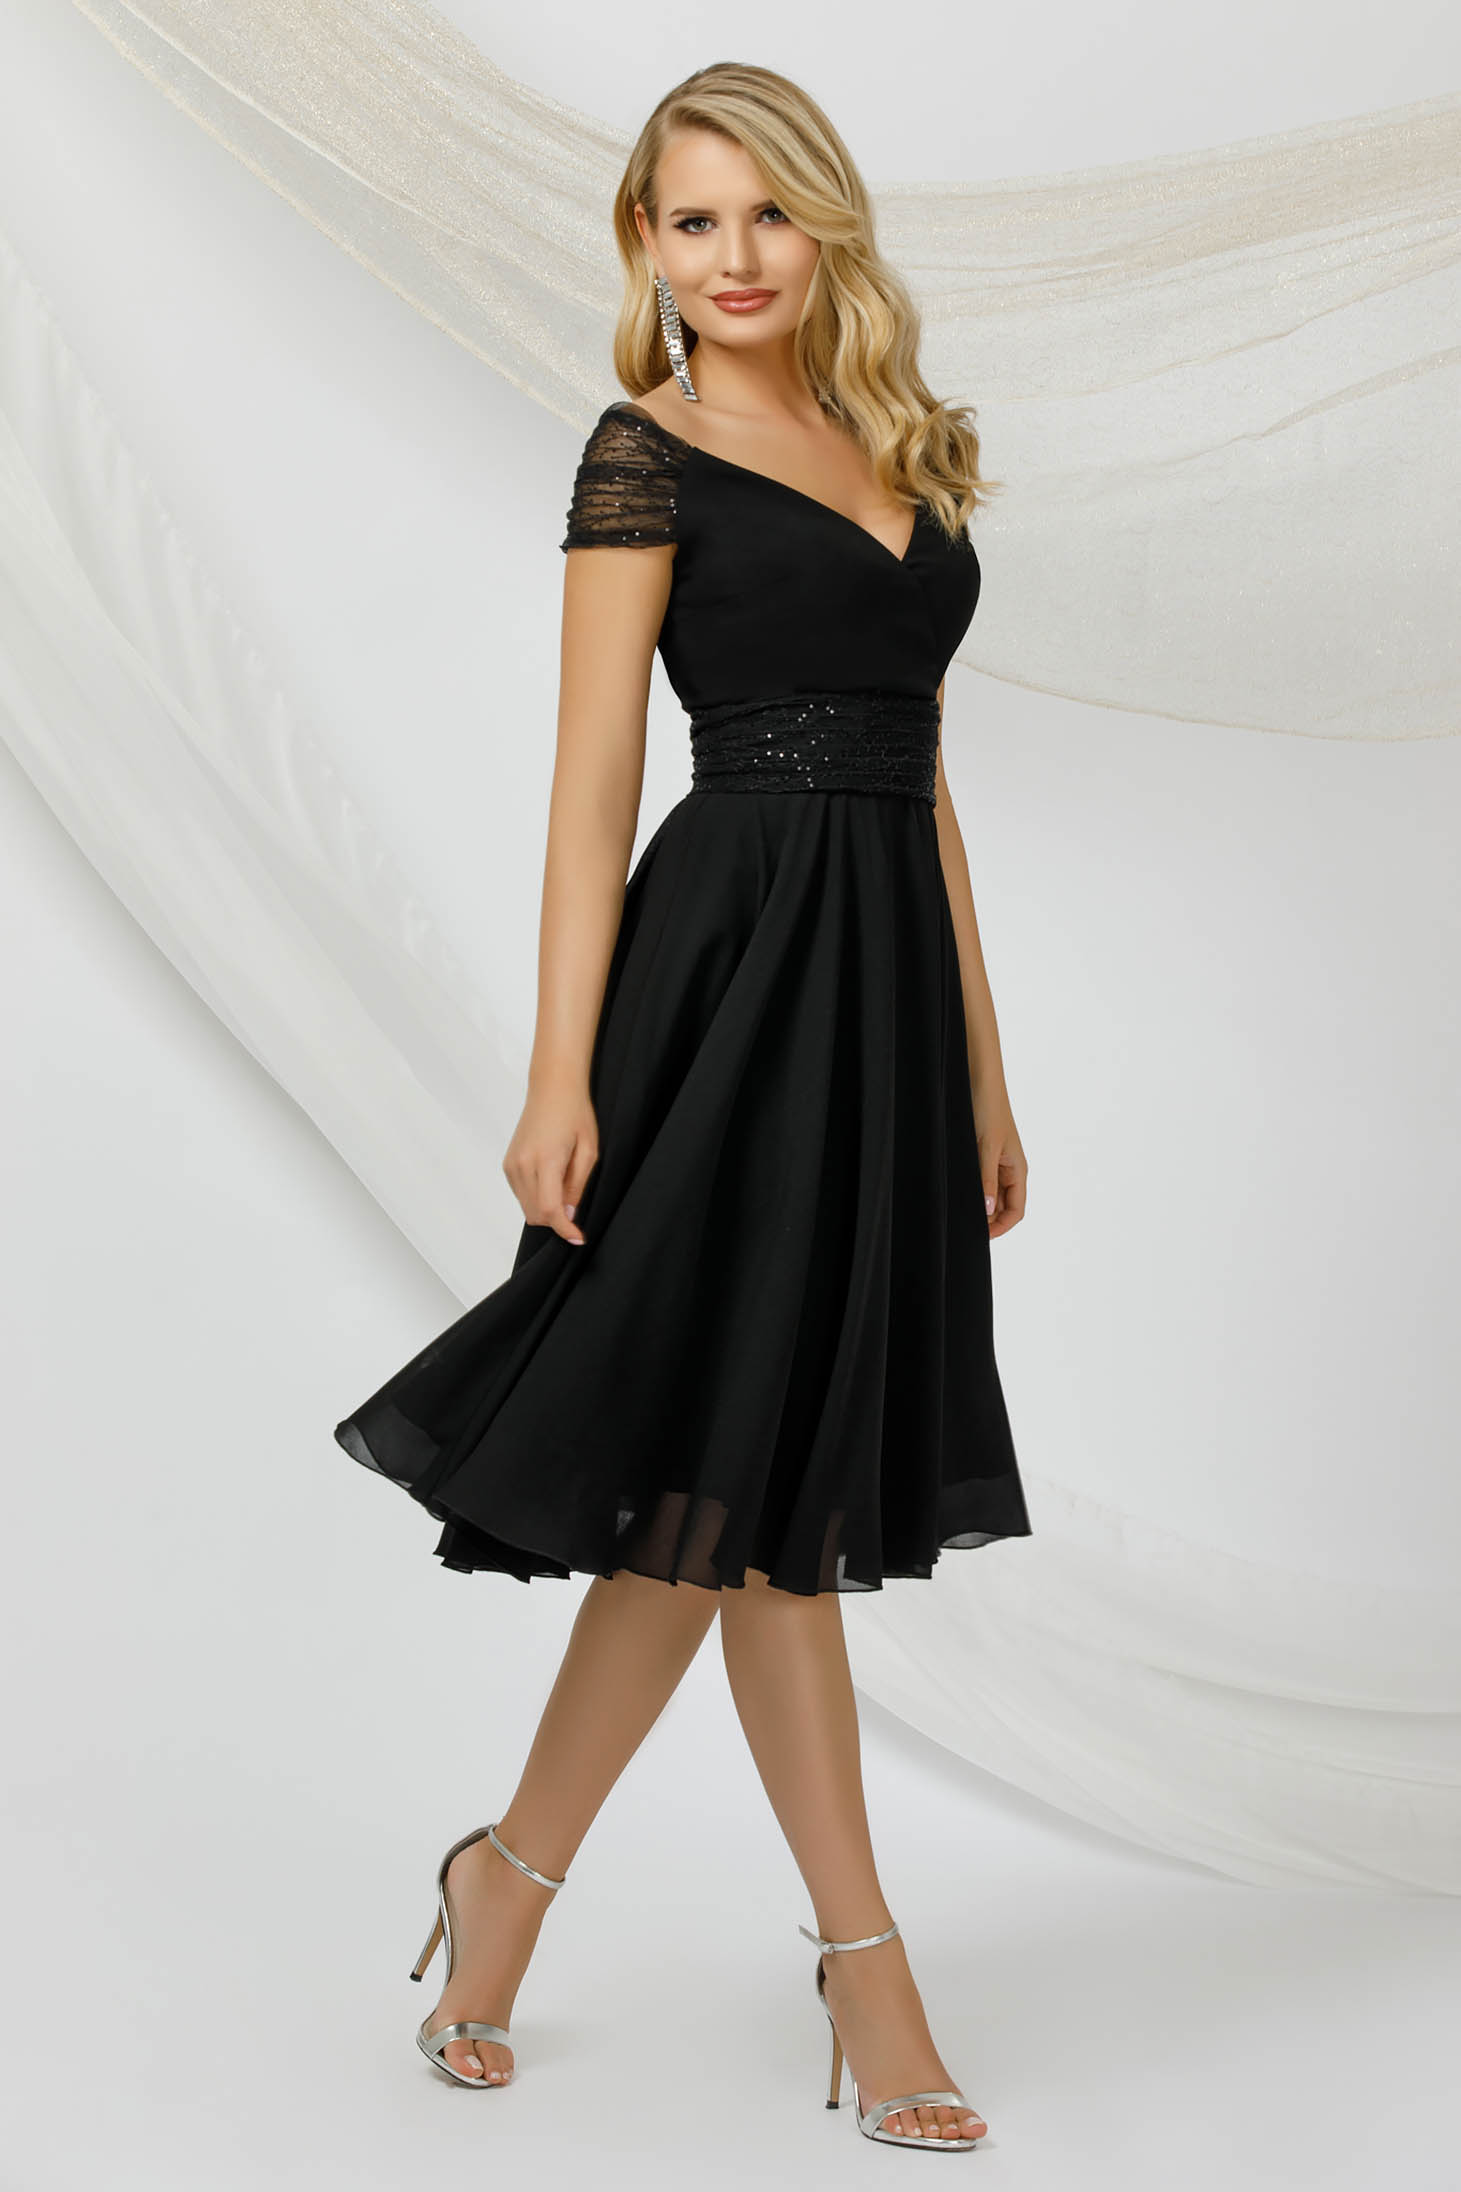 Black dress thin fabric from veil fabric with sequin embellished details midi